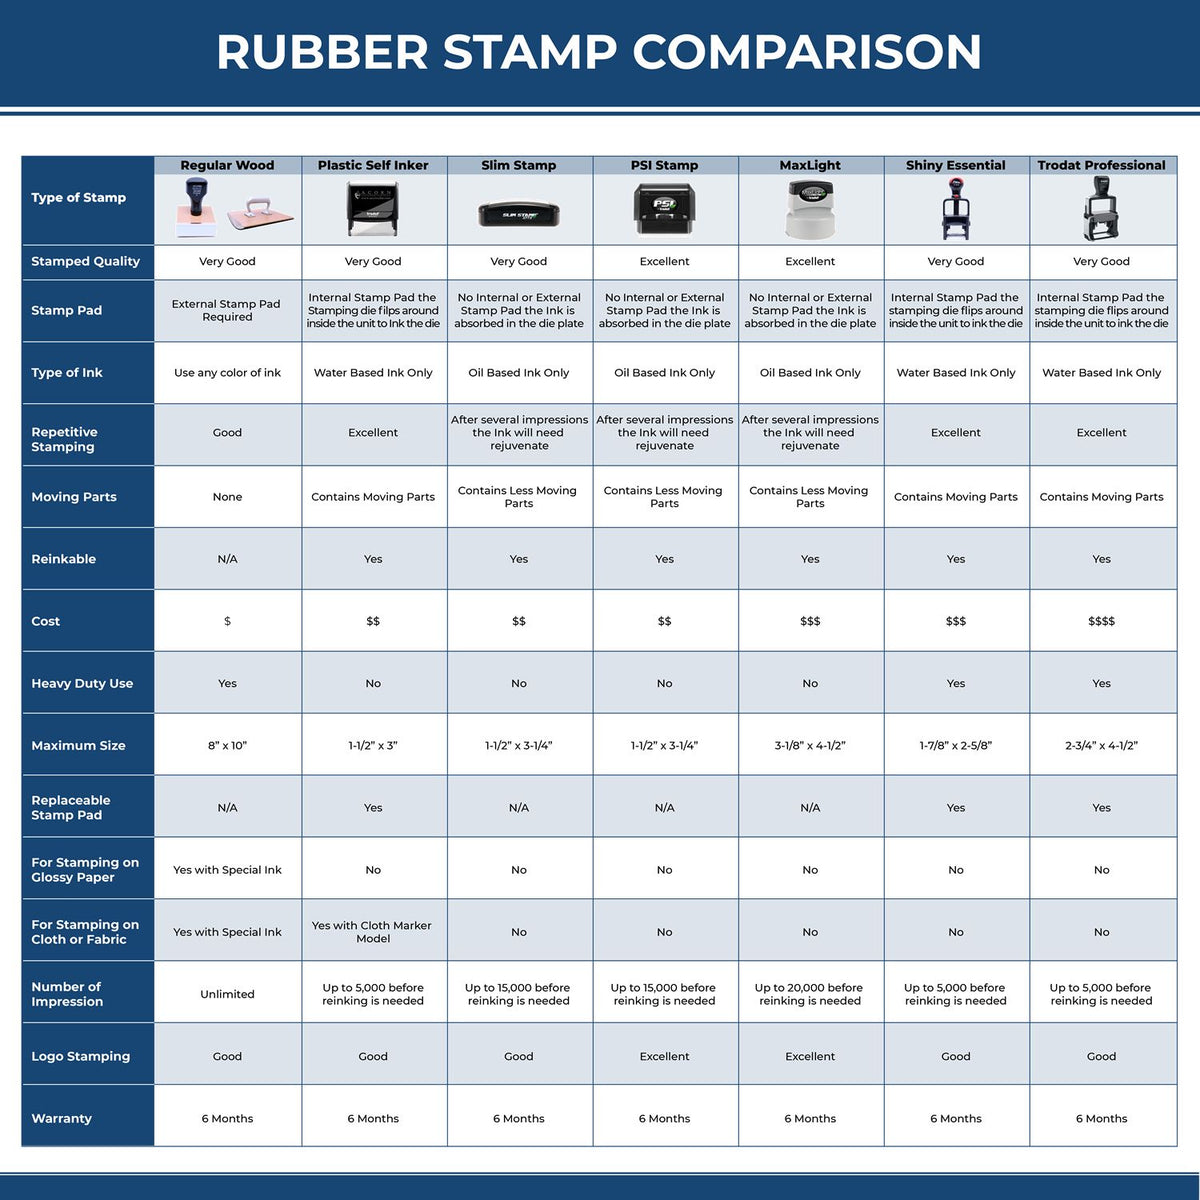 A comparison chart for the different types of mount models available for the MaxLight Premium Pre-Inked Connecticut State Seal Notarial Stamp.